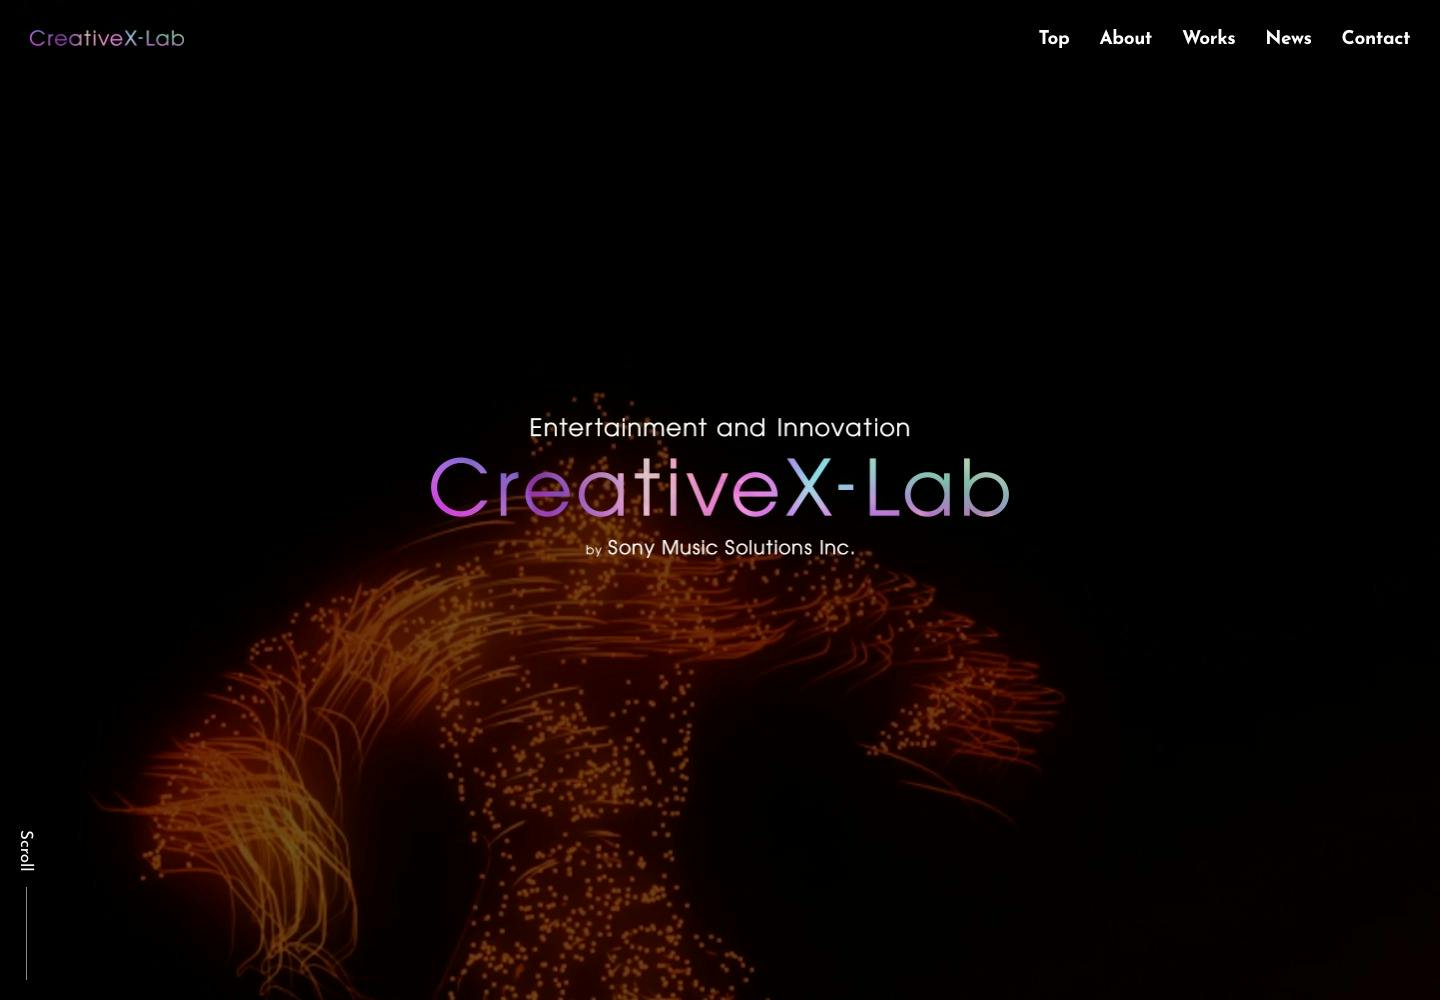 Cover Image for Creative X-lab | 株式会社ソニー・ミュージックソリューションズ